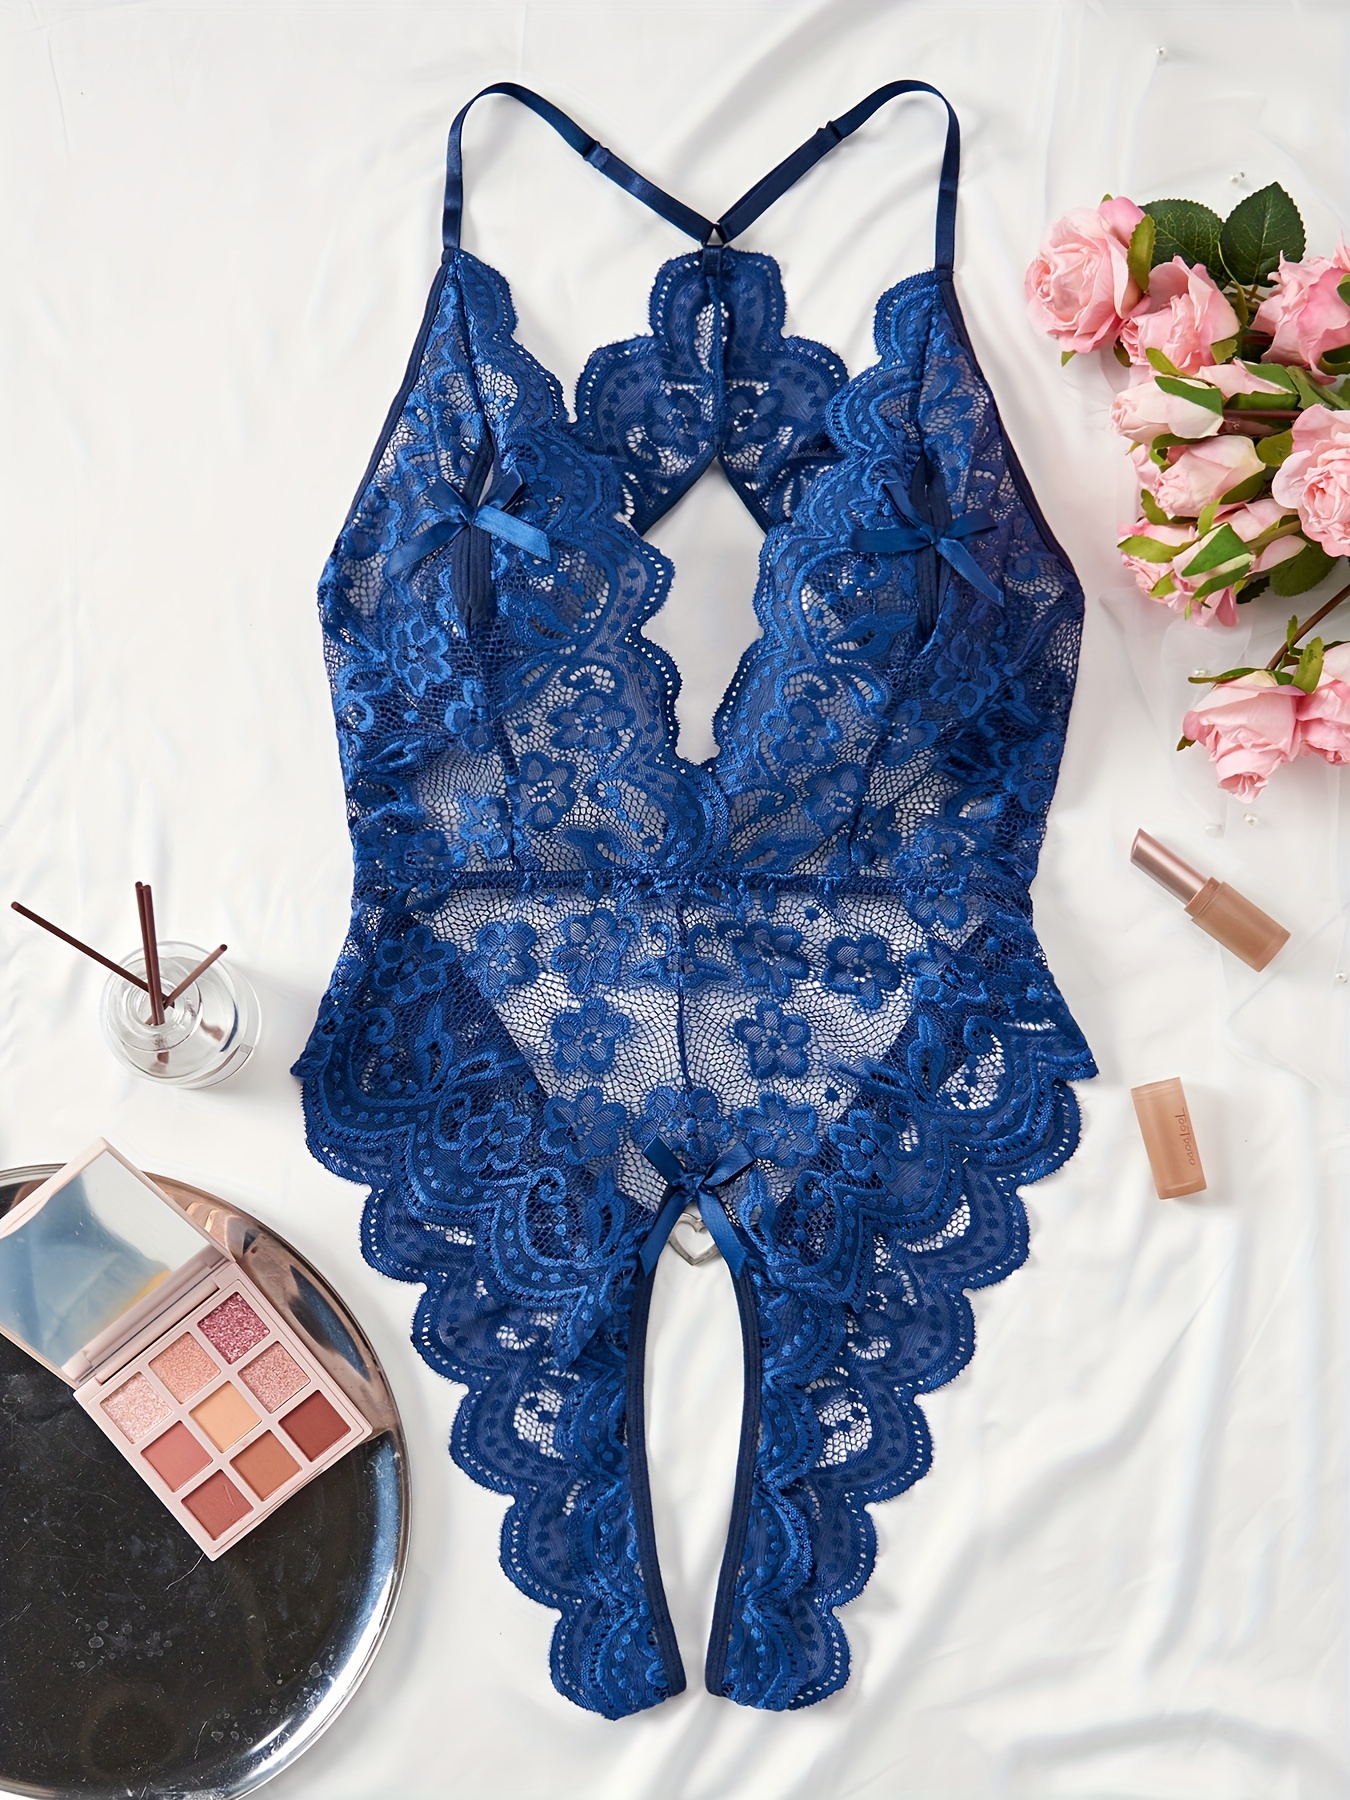 Women's Sexy Lingerie Bodysuit, Plus Size Floral Lace Harness Plunging  Teddy Bodysuit With Choker